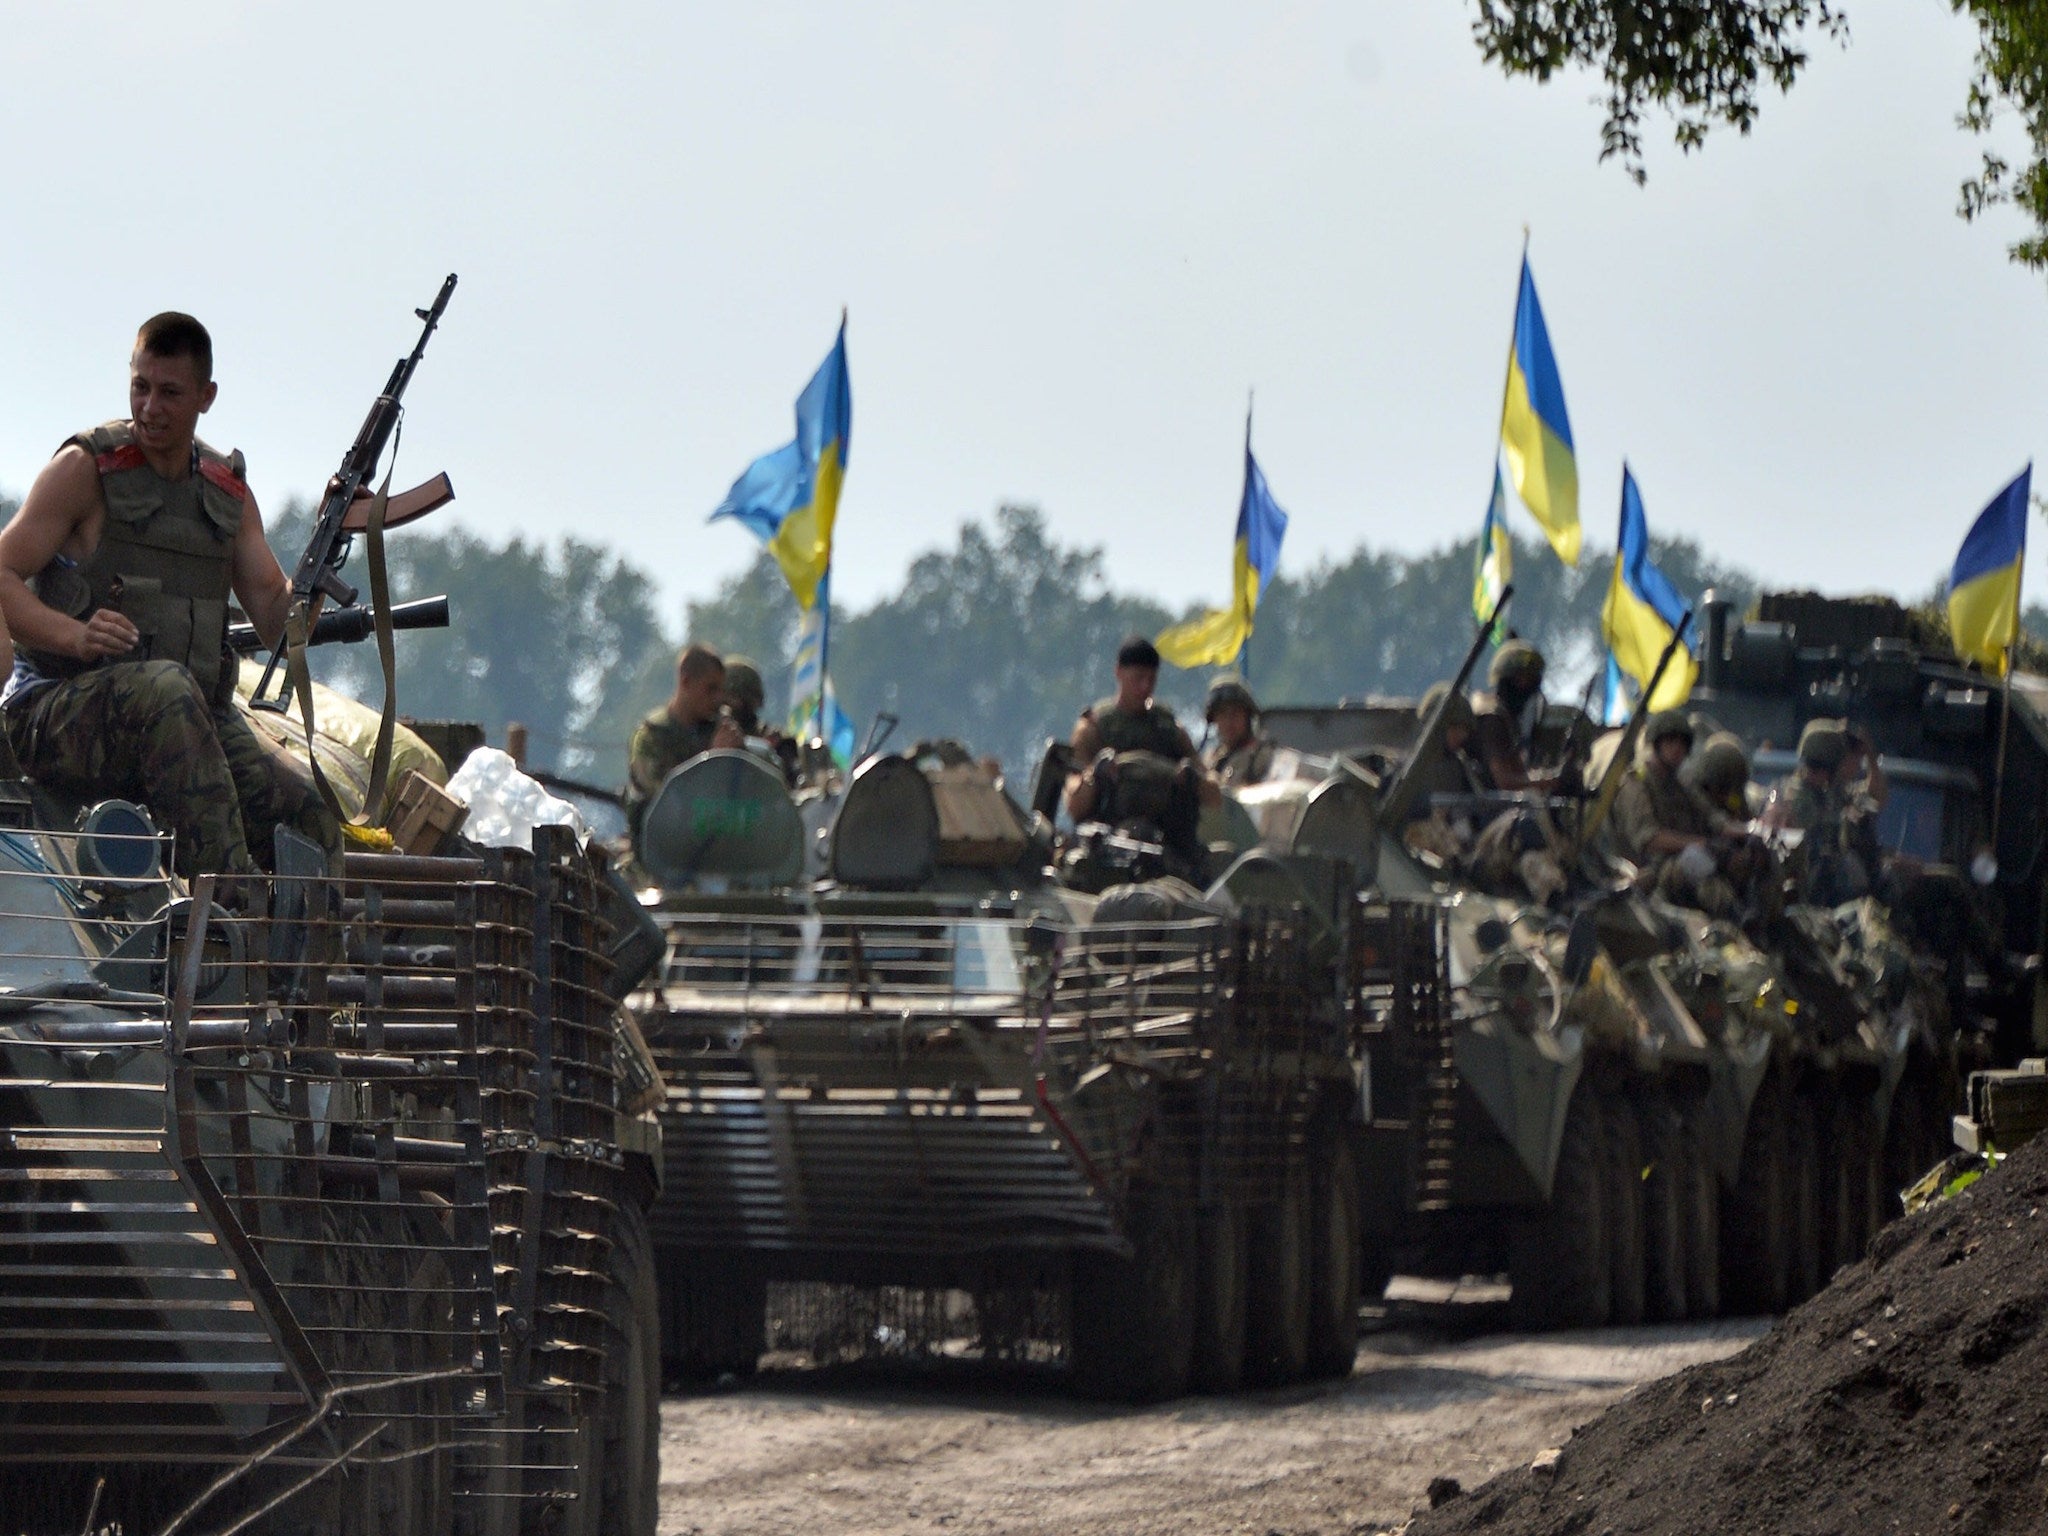 The US is considering whether or not to provide 'lethal weapons' to Ukrainian forces